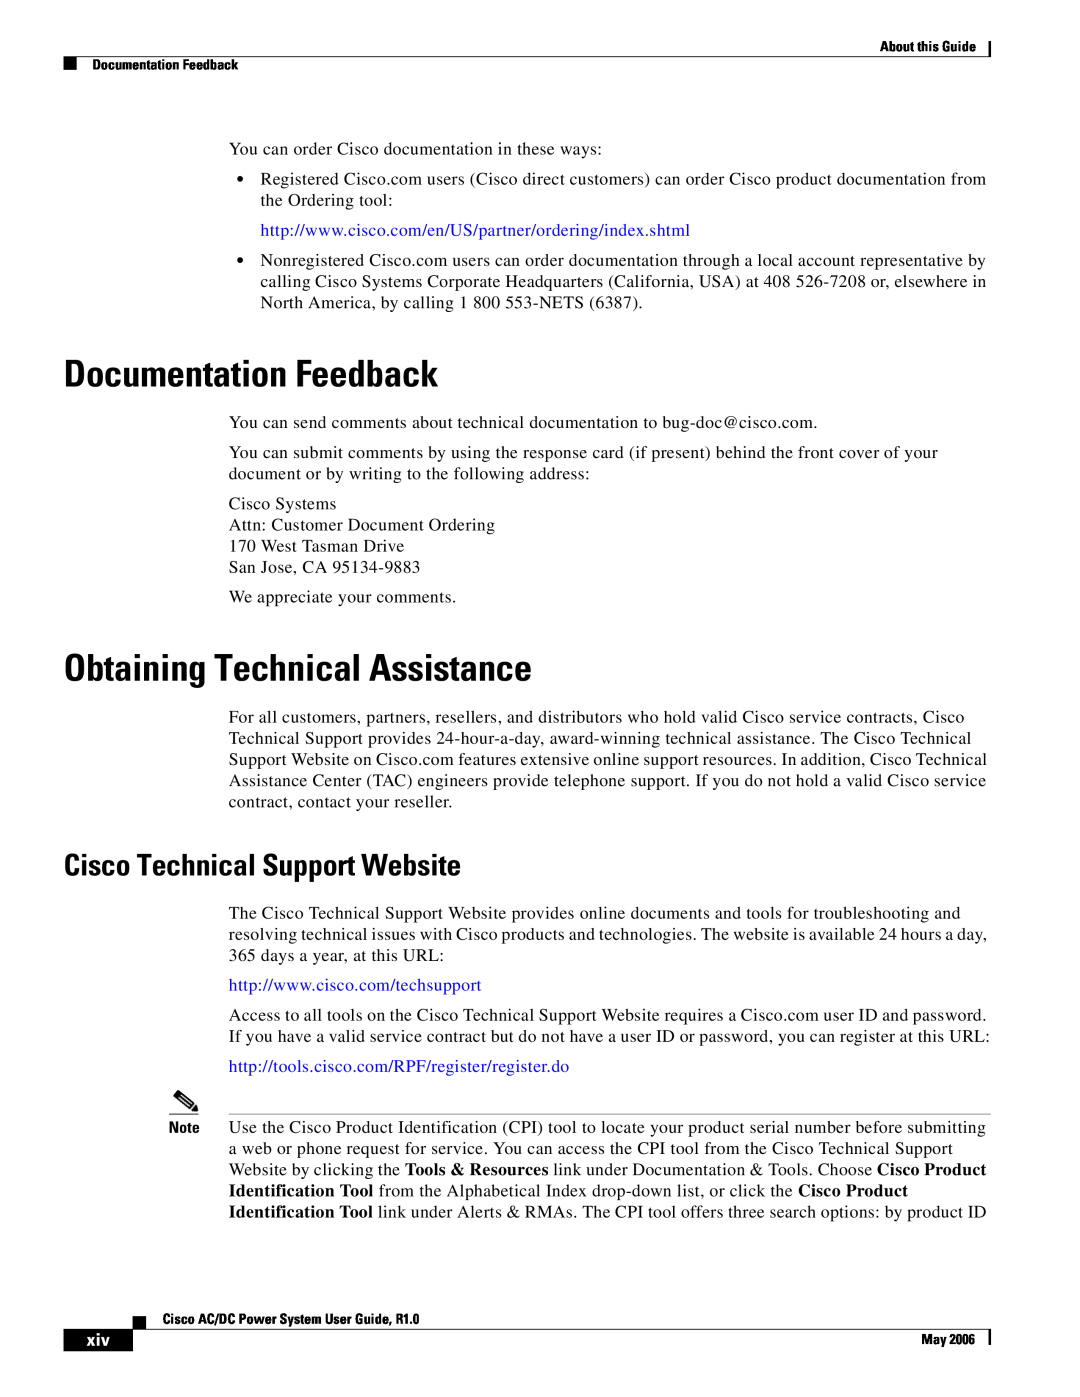 Cisco Systems 159330, 124792 manual Documentation Feedback, Obtaining Technical Assistance, Cisco Technical Support Website 